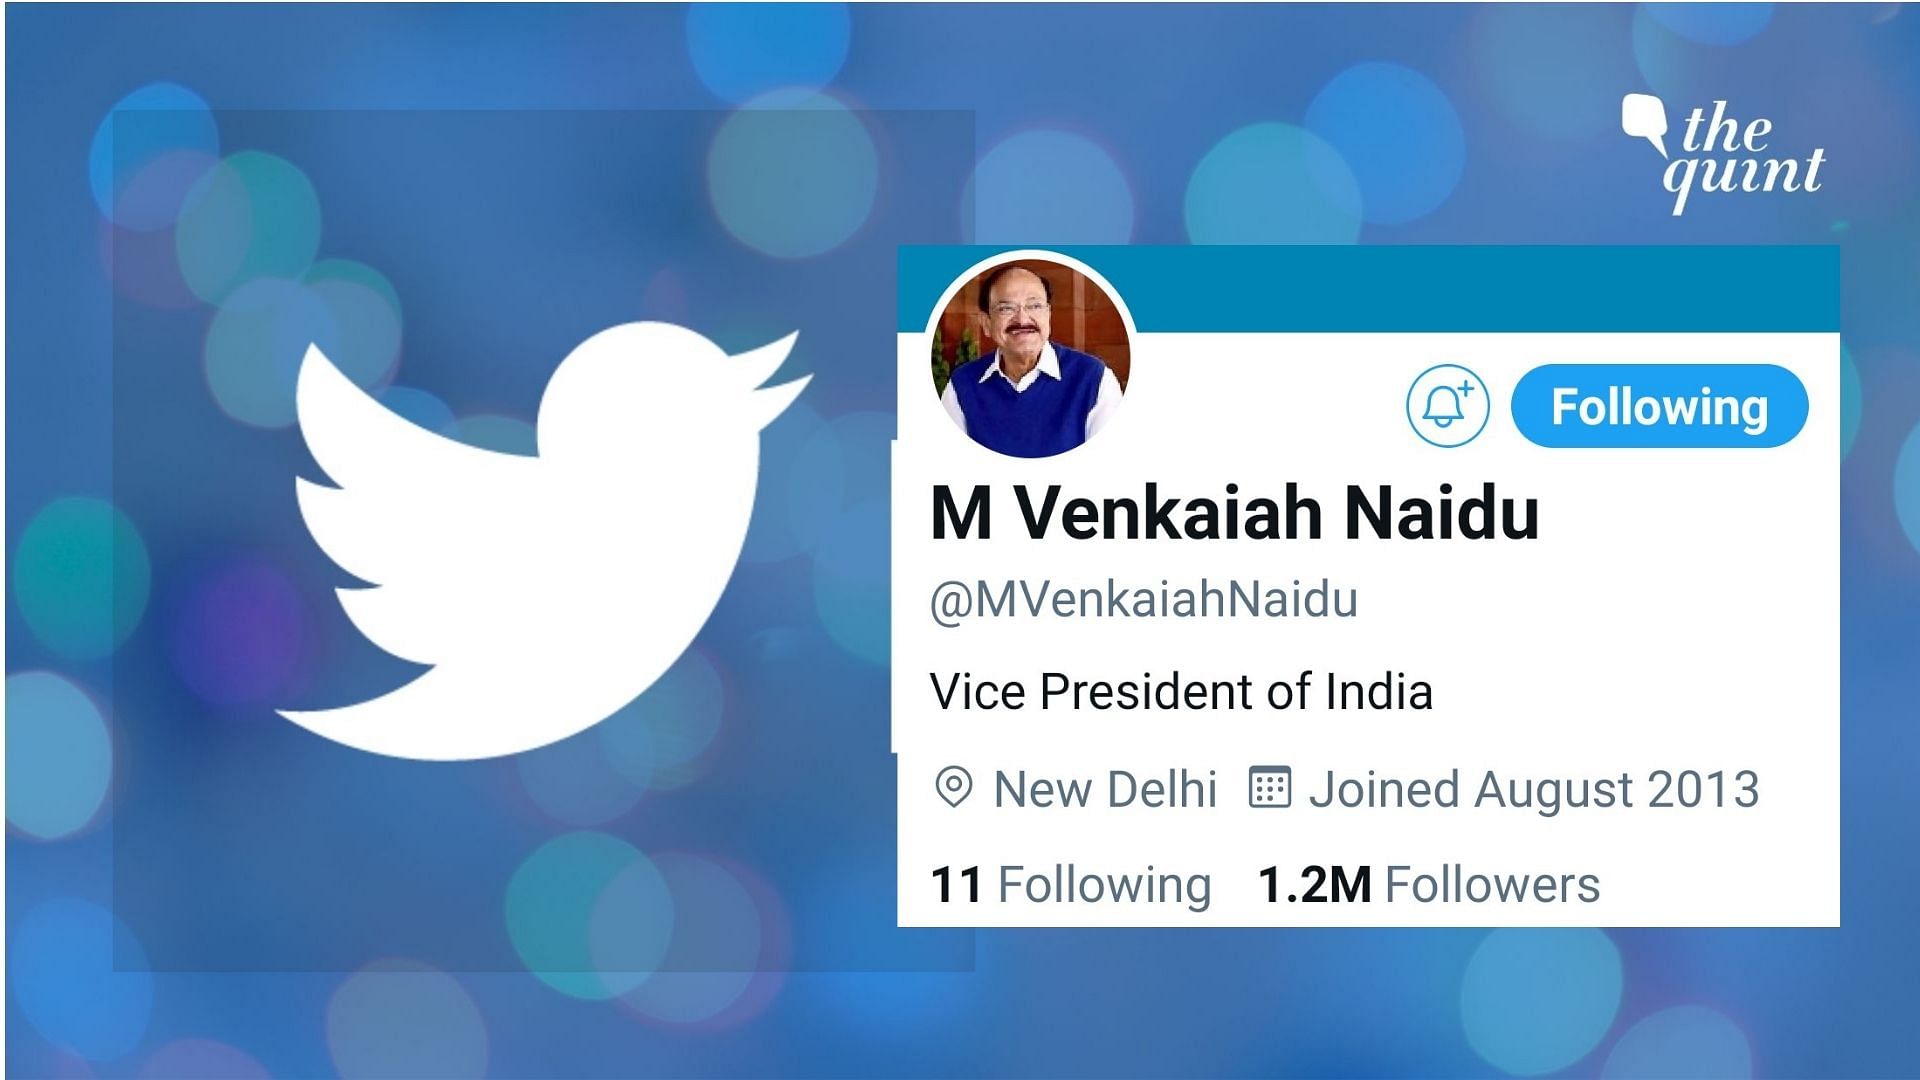 Vice President Venkaiah Naidu’s personal Twitter account has not posted since July last year.